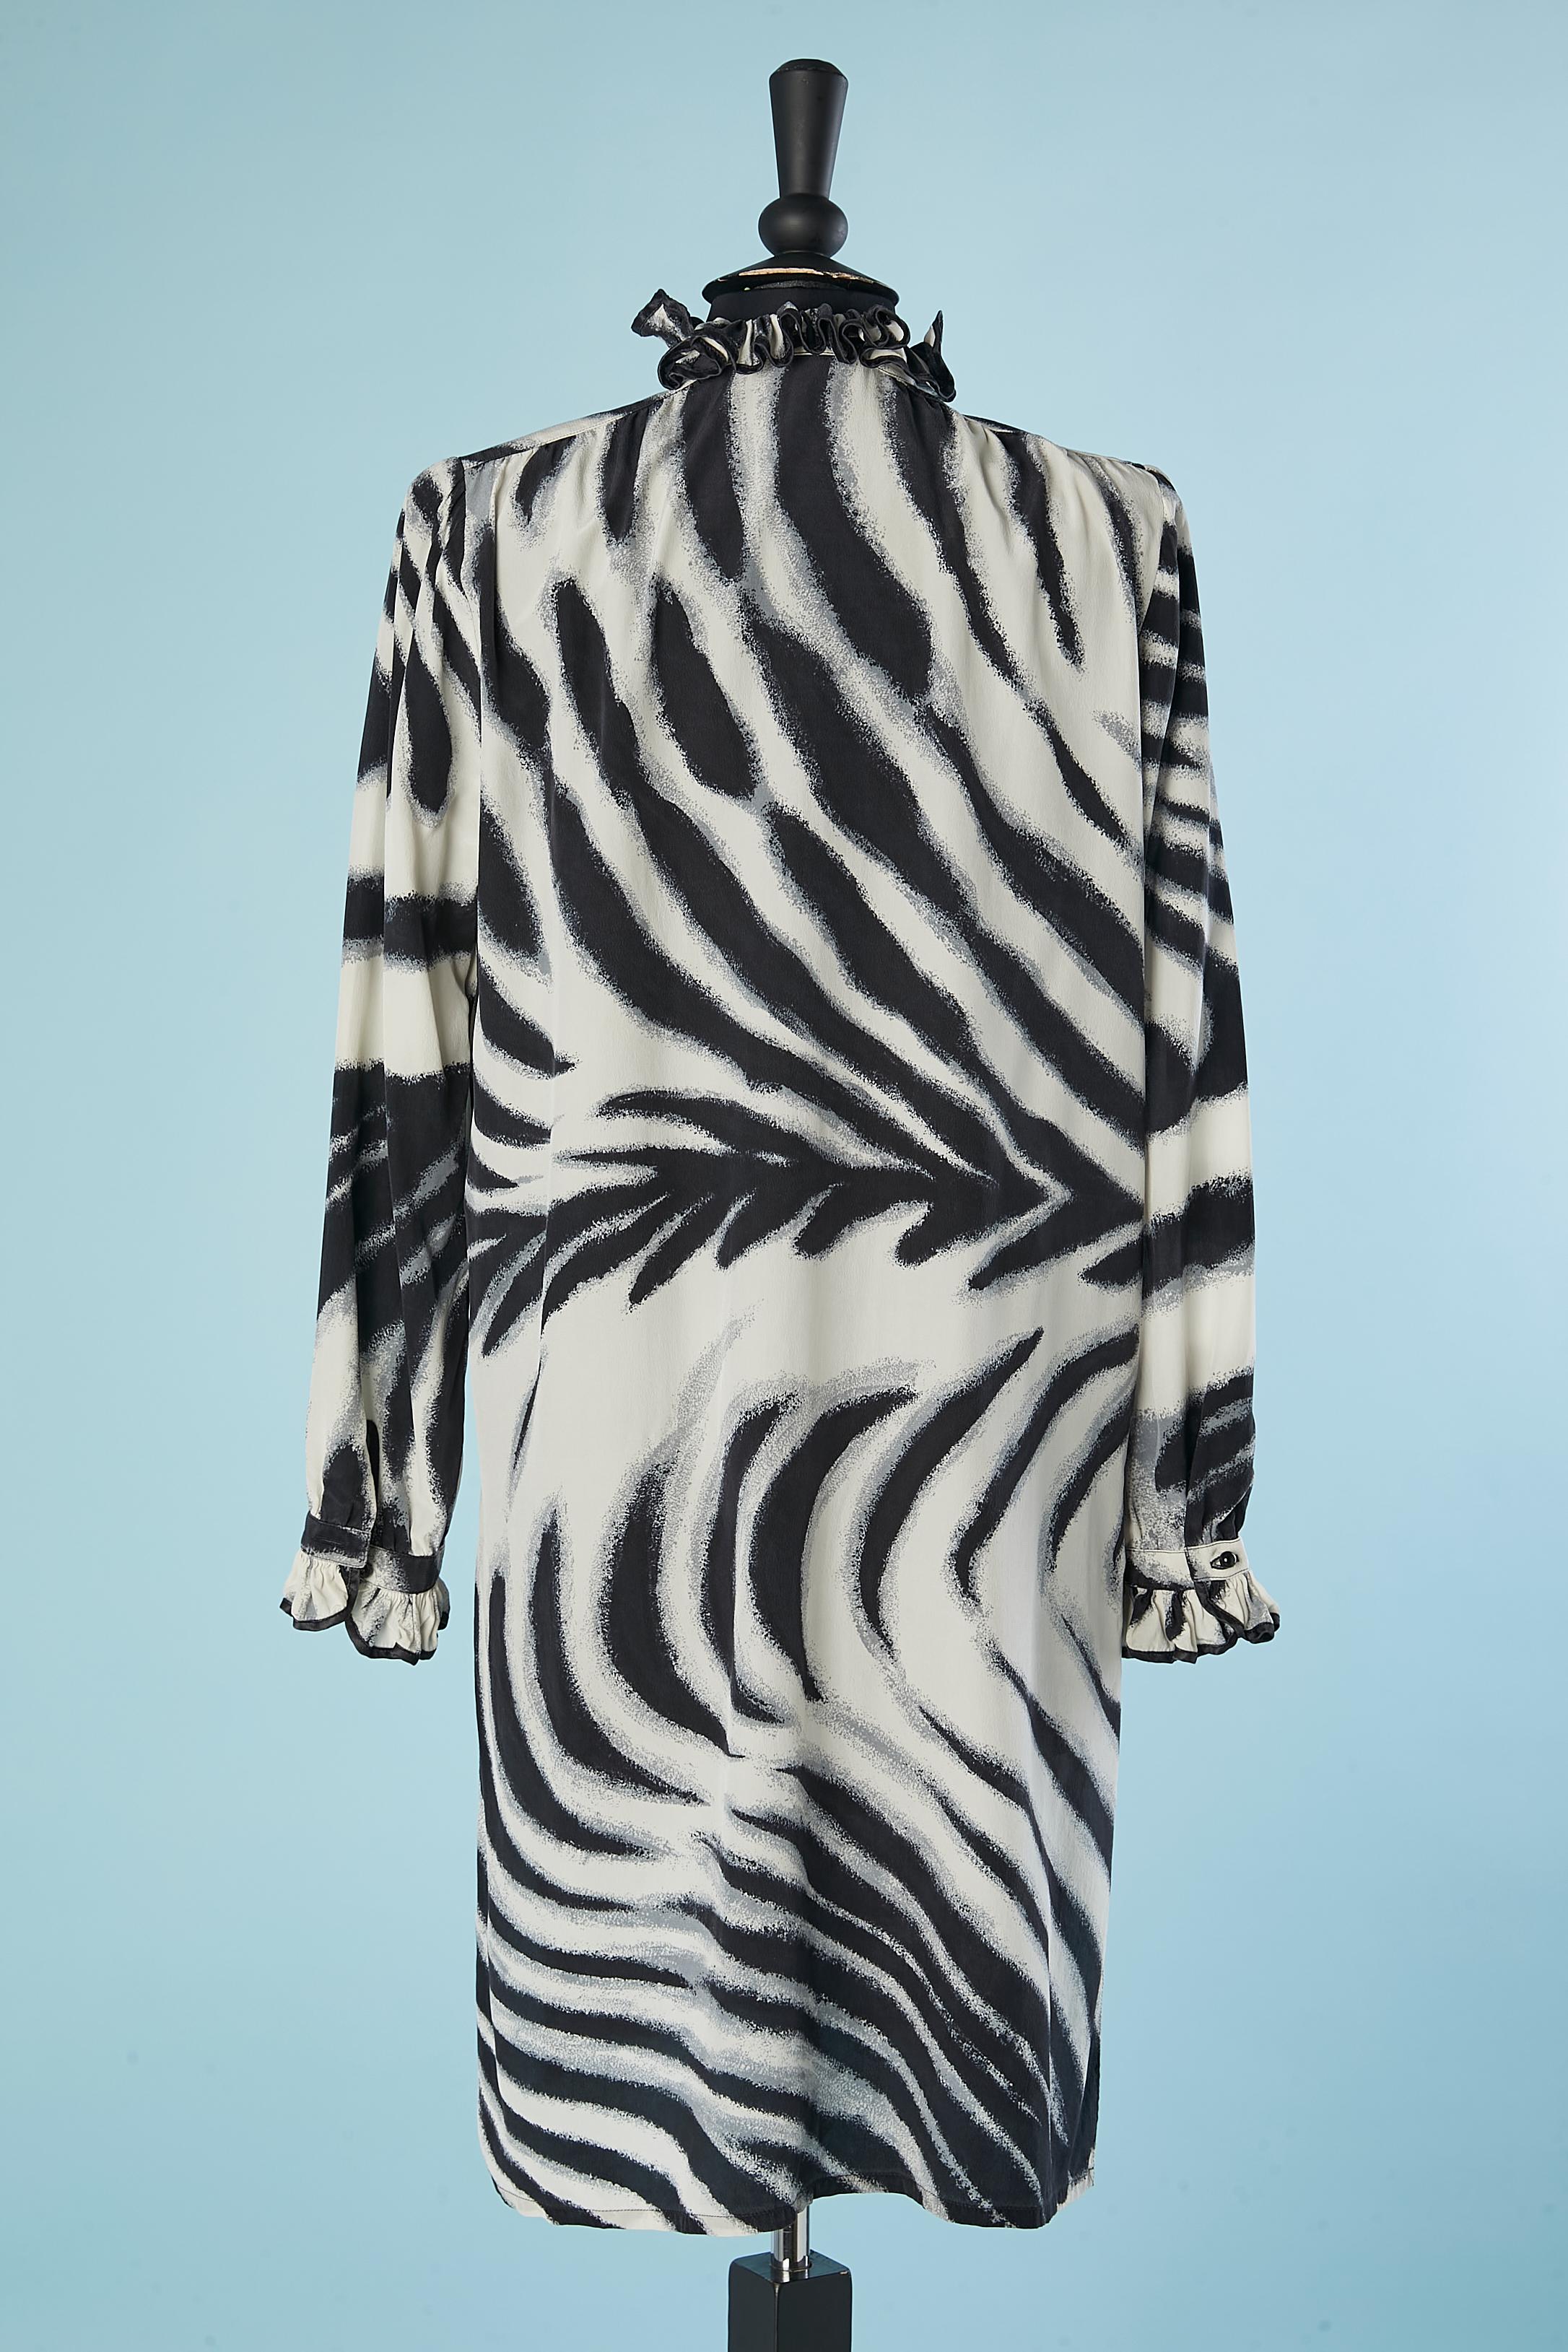 Silk zebra print cocktail dress with collar and cuffs ruffles Louis Féraud  In Excellent Condition For Sale In Saint-Ouen-Sur-Seine, FR